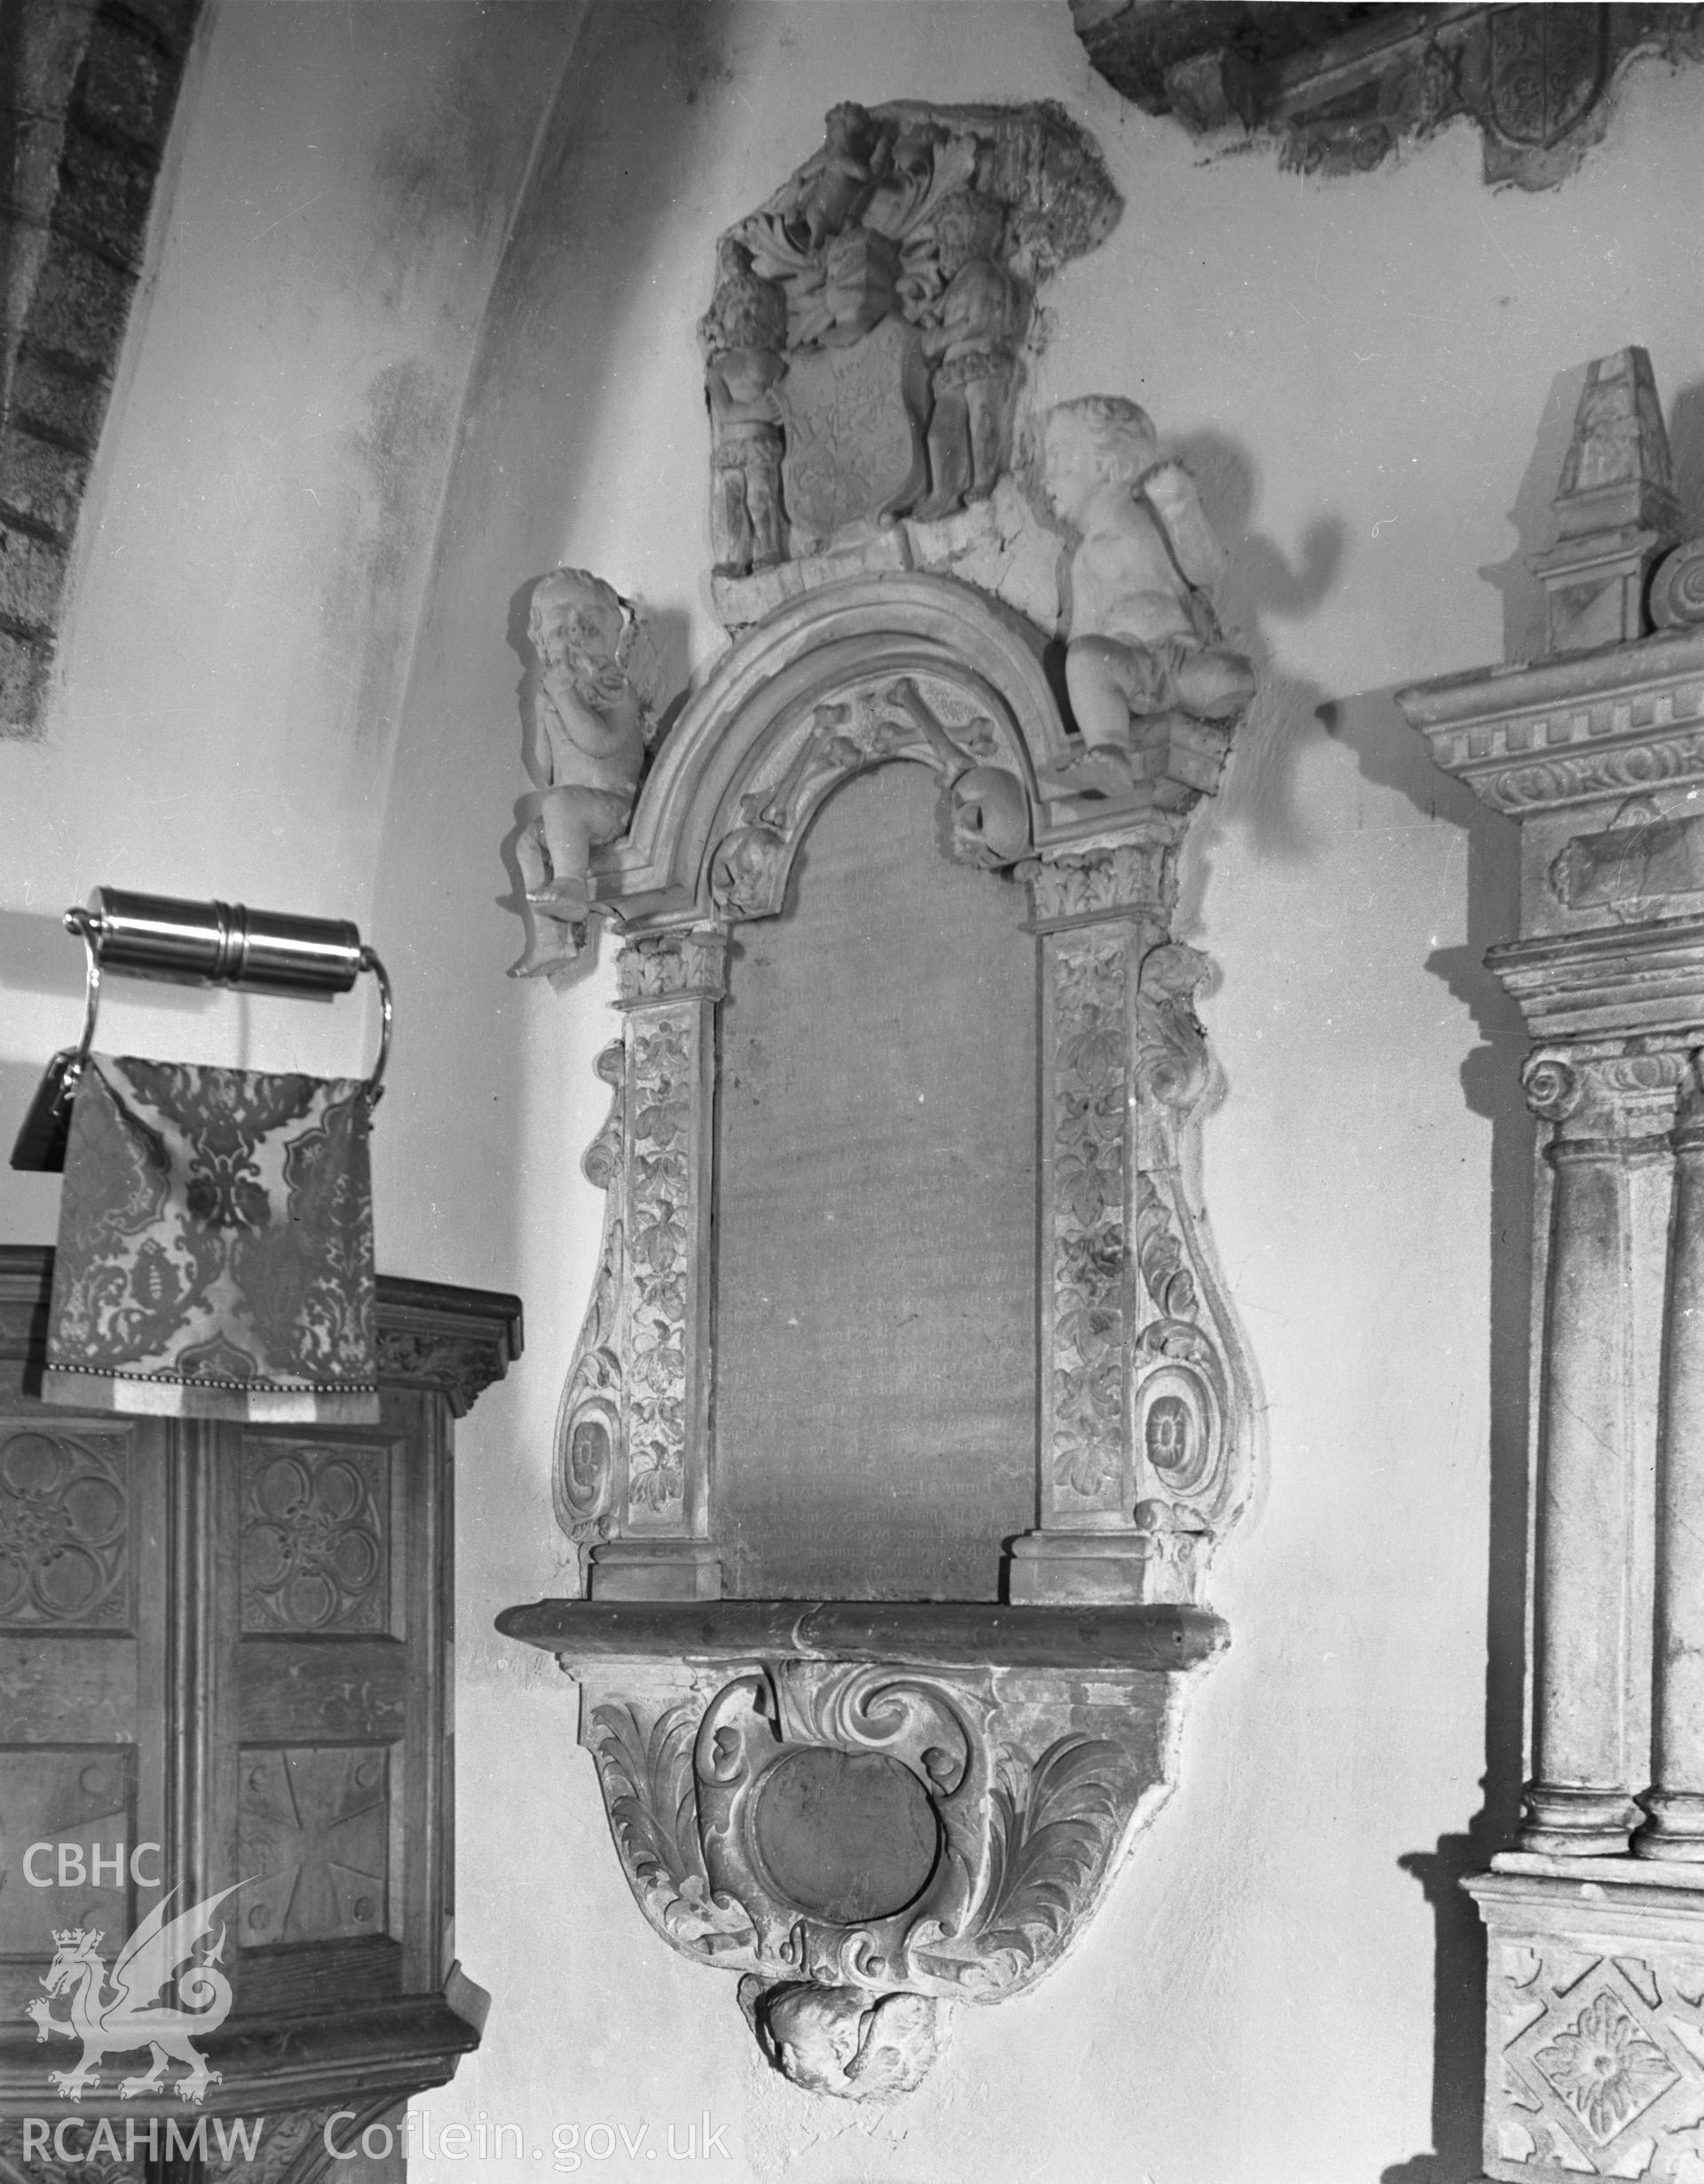 View of monument to Hugh Owen d.1670 in the north wall of the nave at Monkton Priory taken in 07.08.1941.